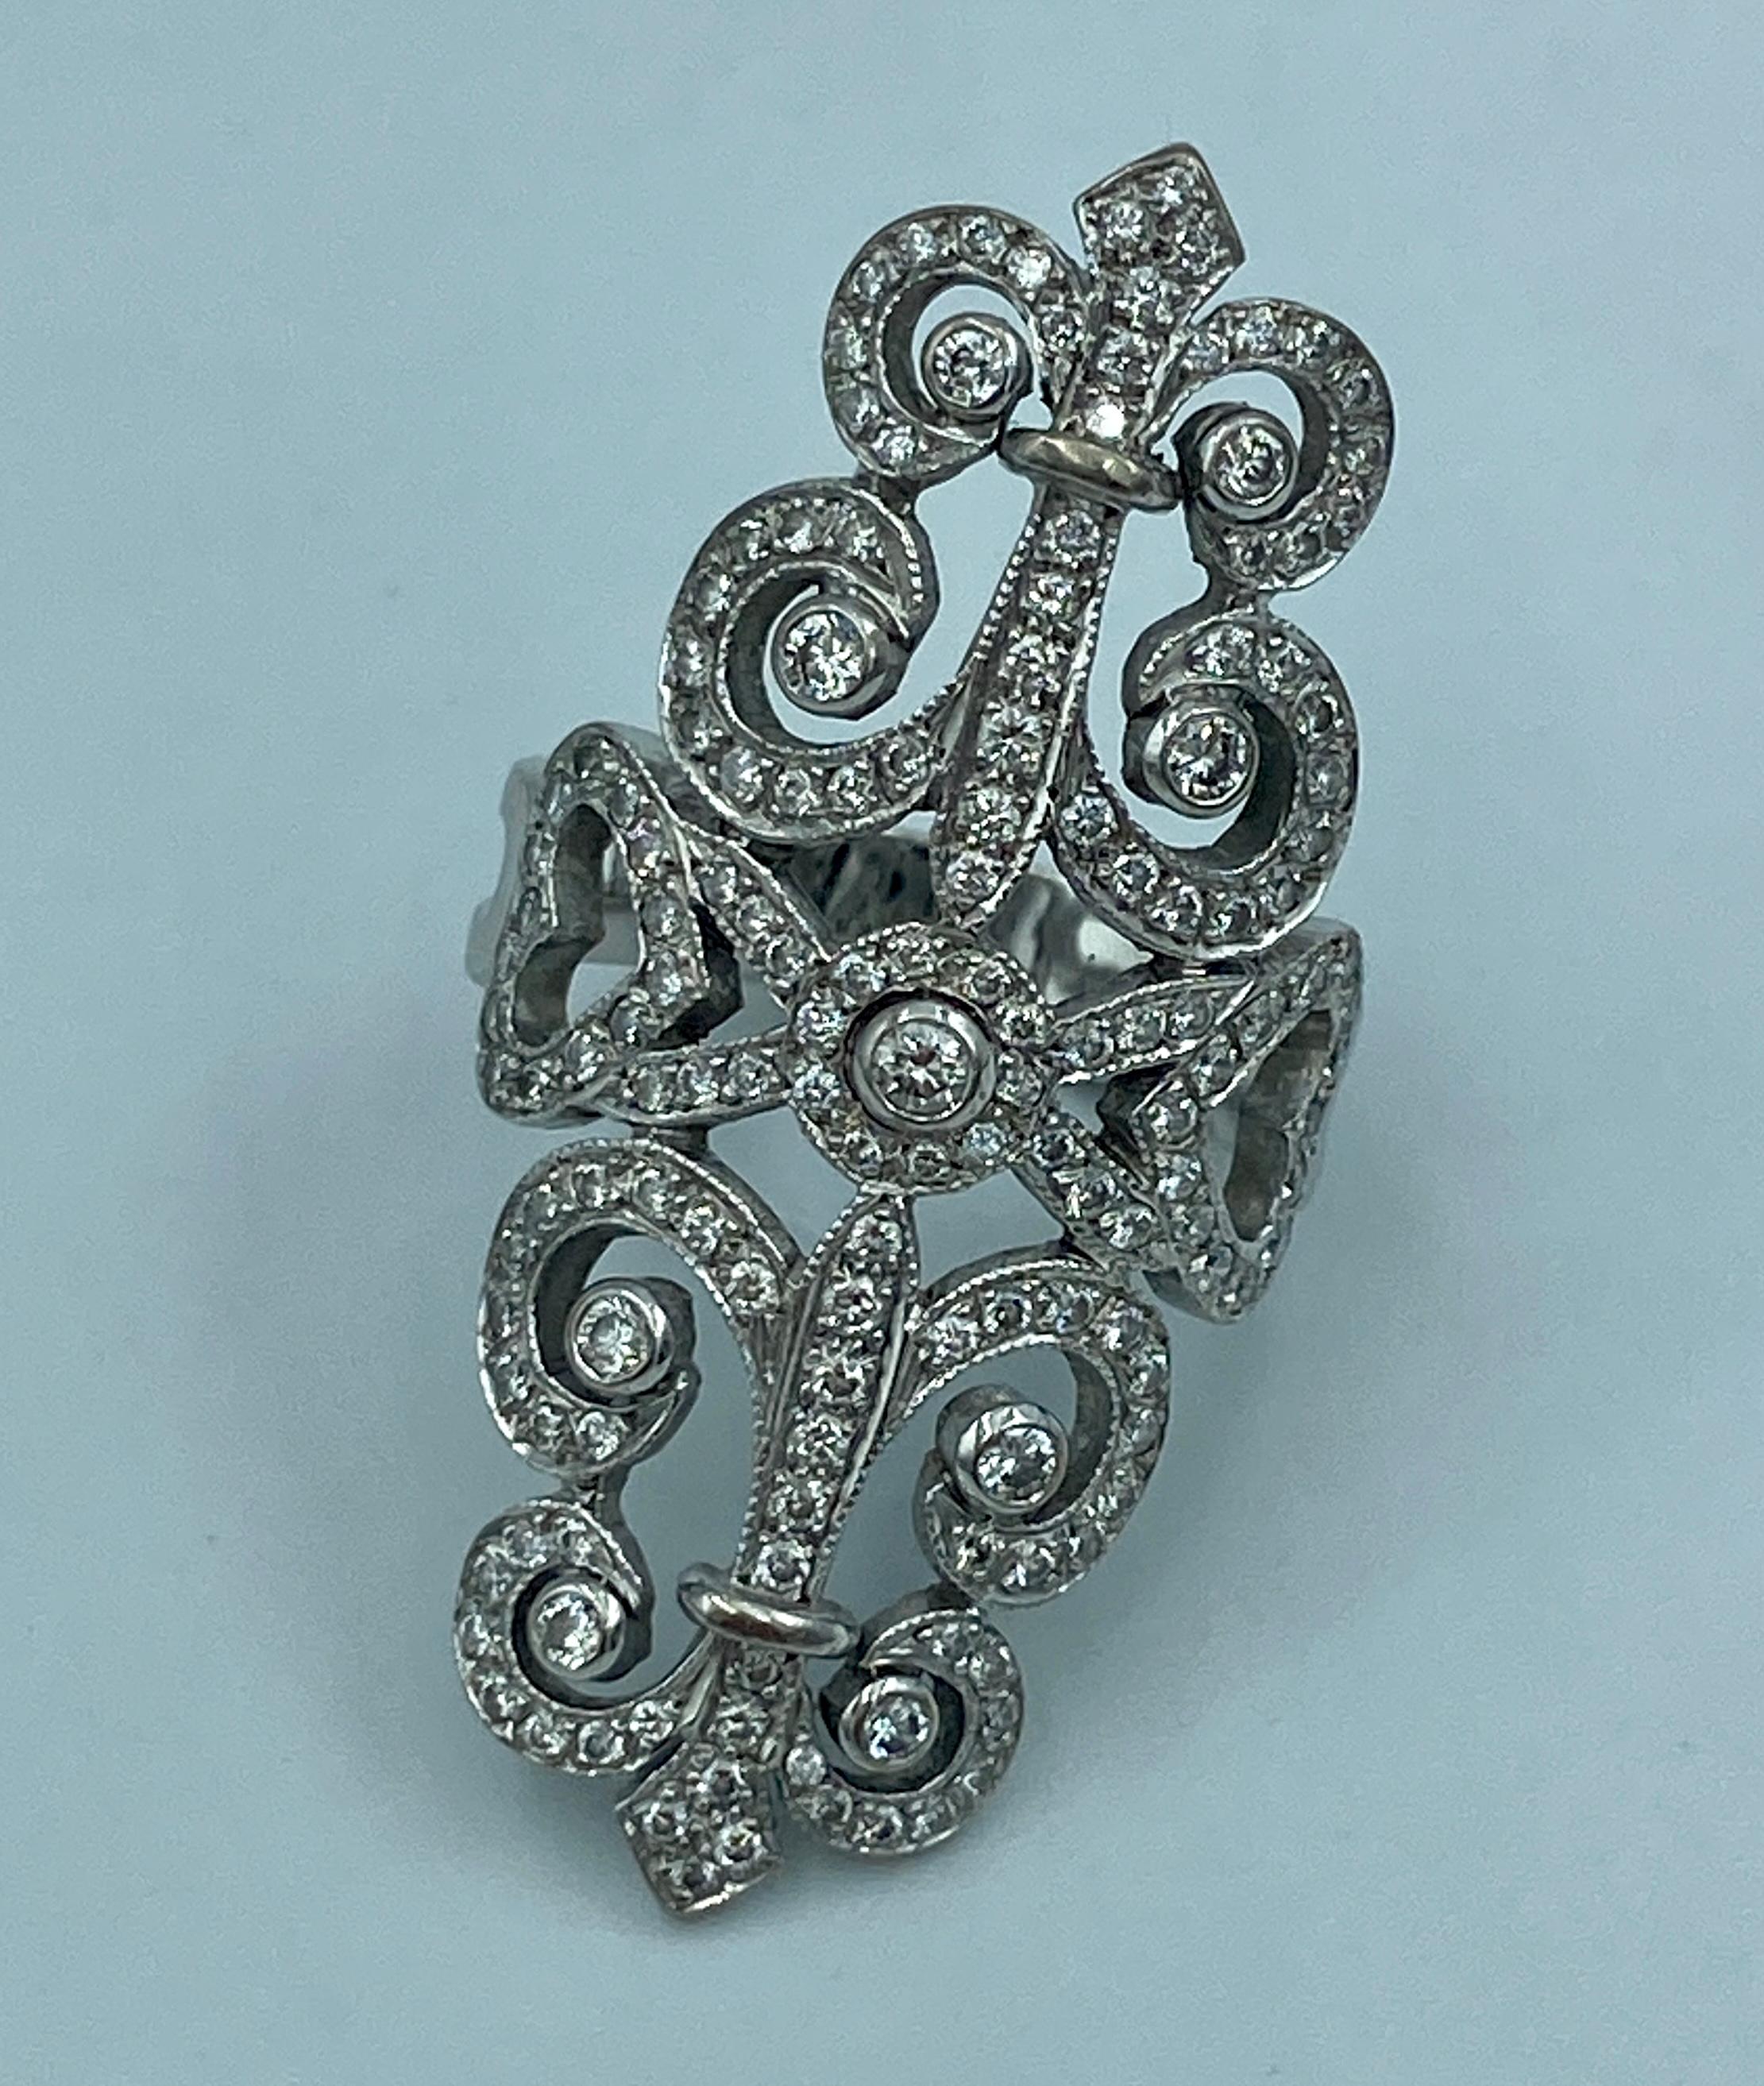 This striking Edouard Nahum ring is made of 18k gold and diamonds in the Baroque revival style. It is an unusual piece and in spite of its size most comfortable to wear.